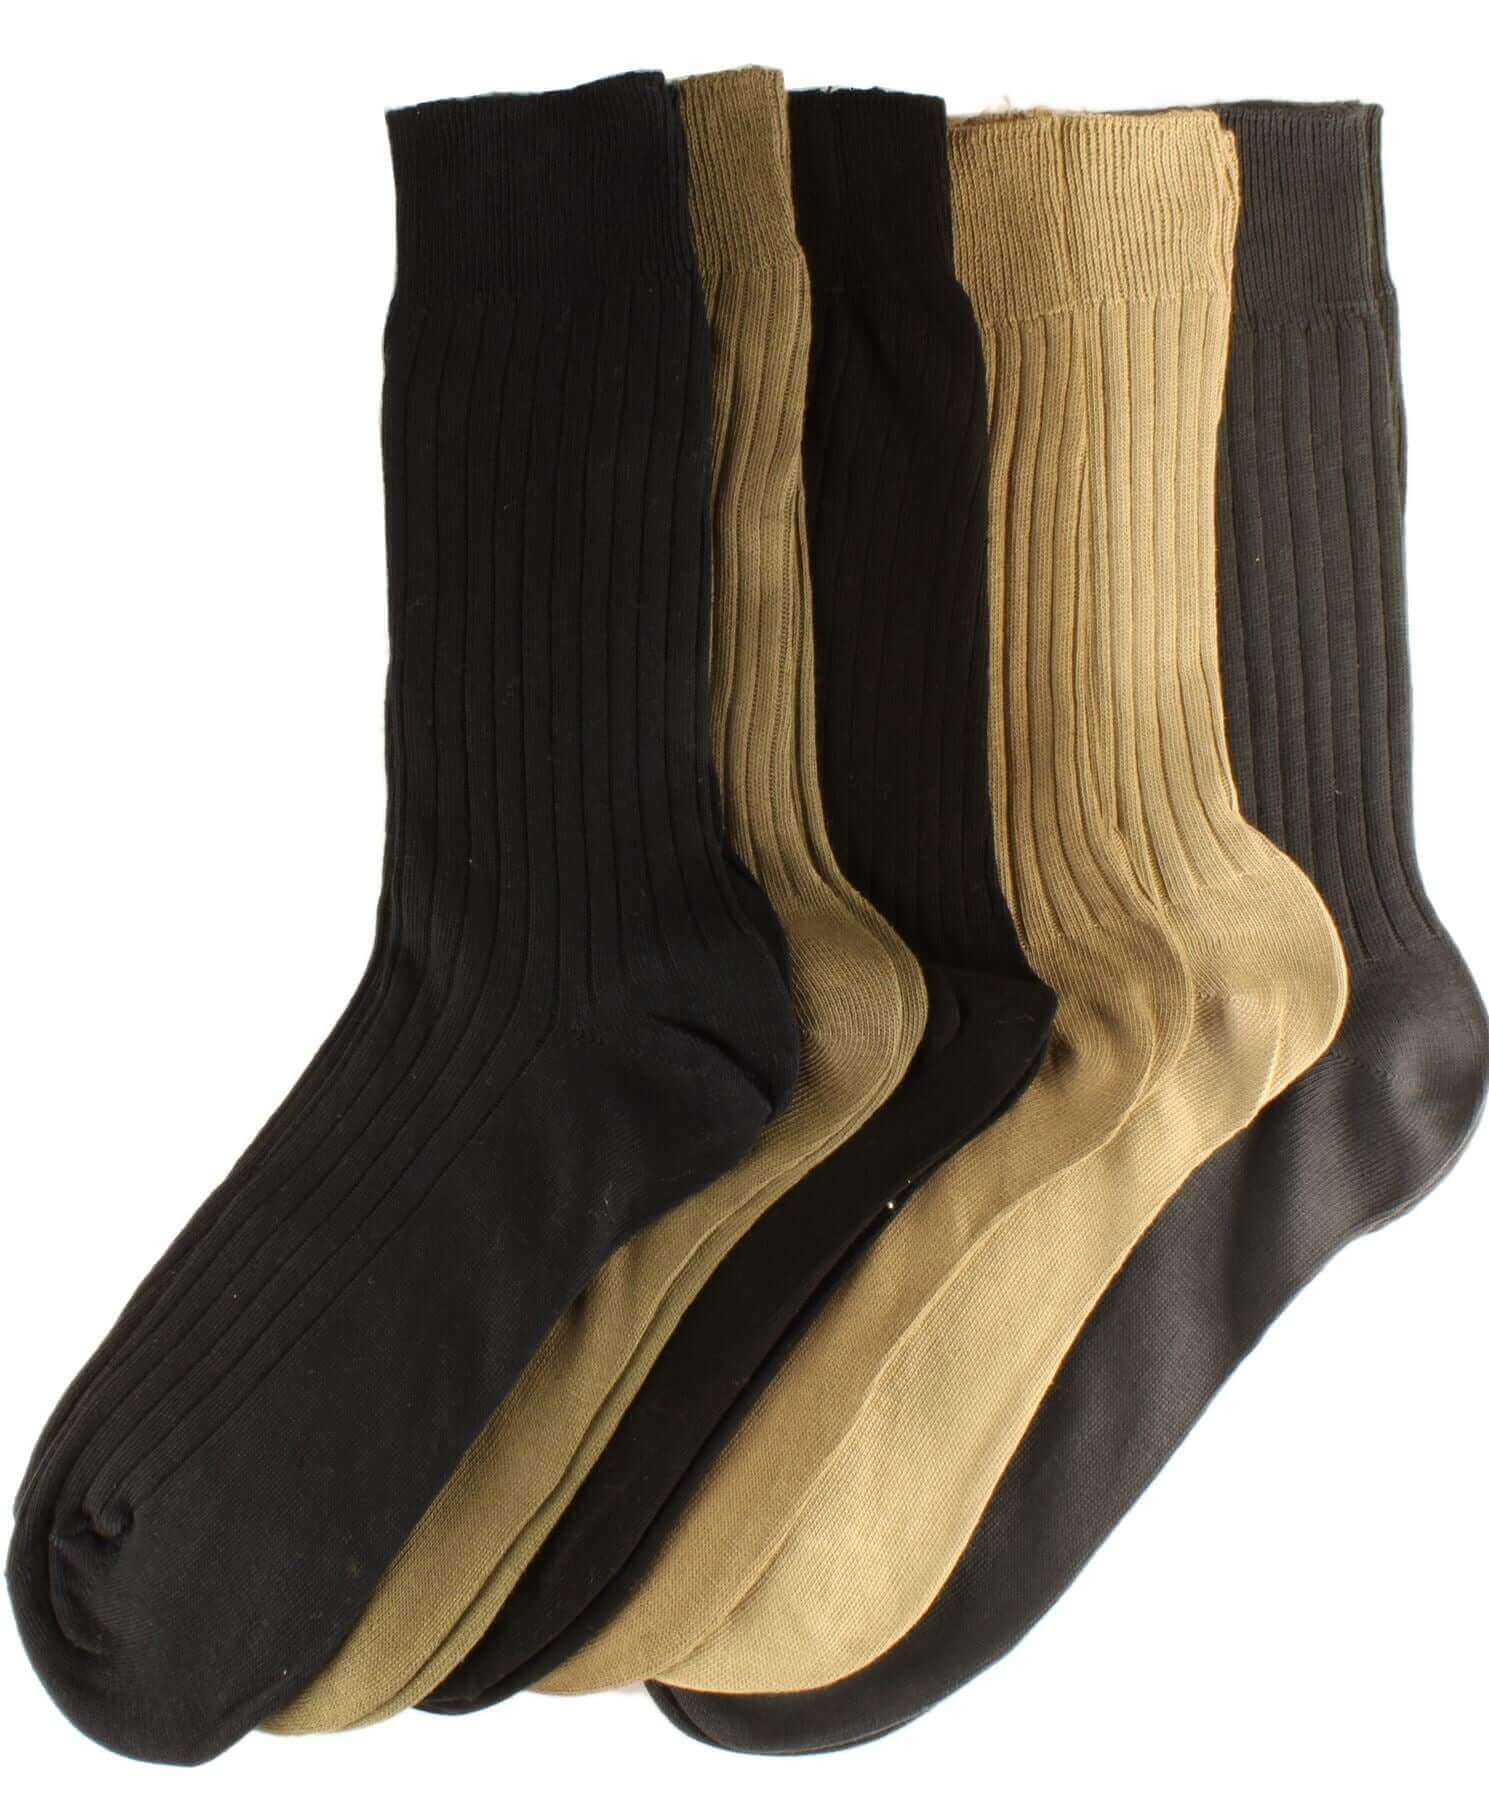 12 Pairs Men's Ribbed 100% Cotton Socks, Seam Free Toe Dress Socks. Buy now for £9.00. A Socks by Sock Stack. 6-11, assorted, black, black socks, boot, boot socks, boys socks, breathable, brown, comfortable, cosy, cotton, cycling, footwear, grey, hiking,